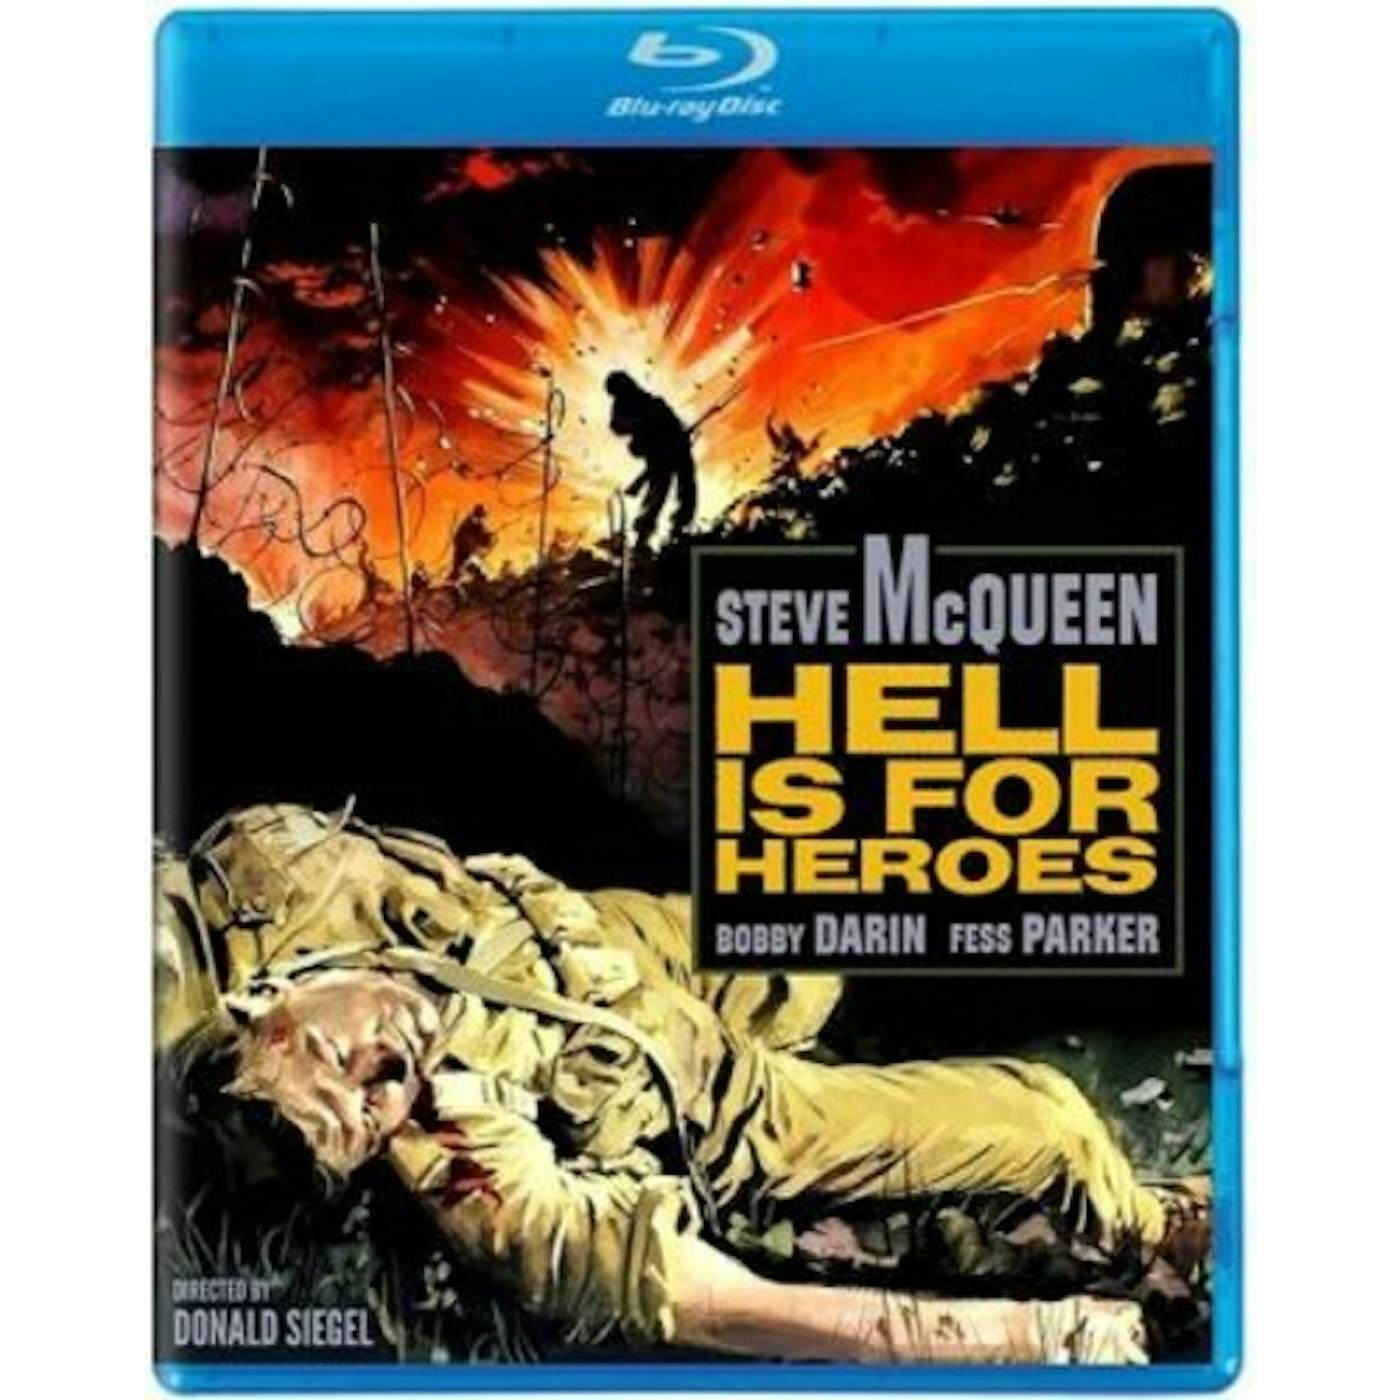 HELL IS FOR HEROES Blu-ray